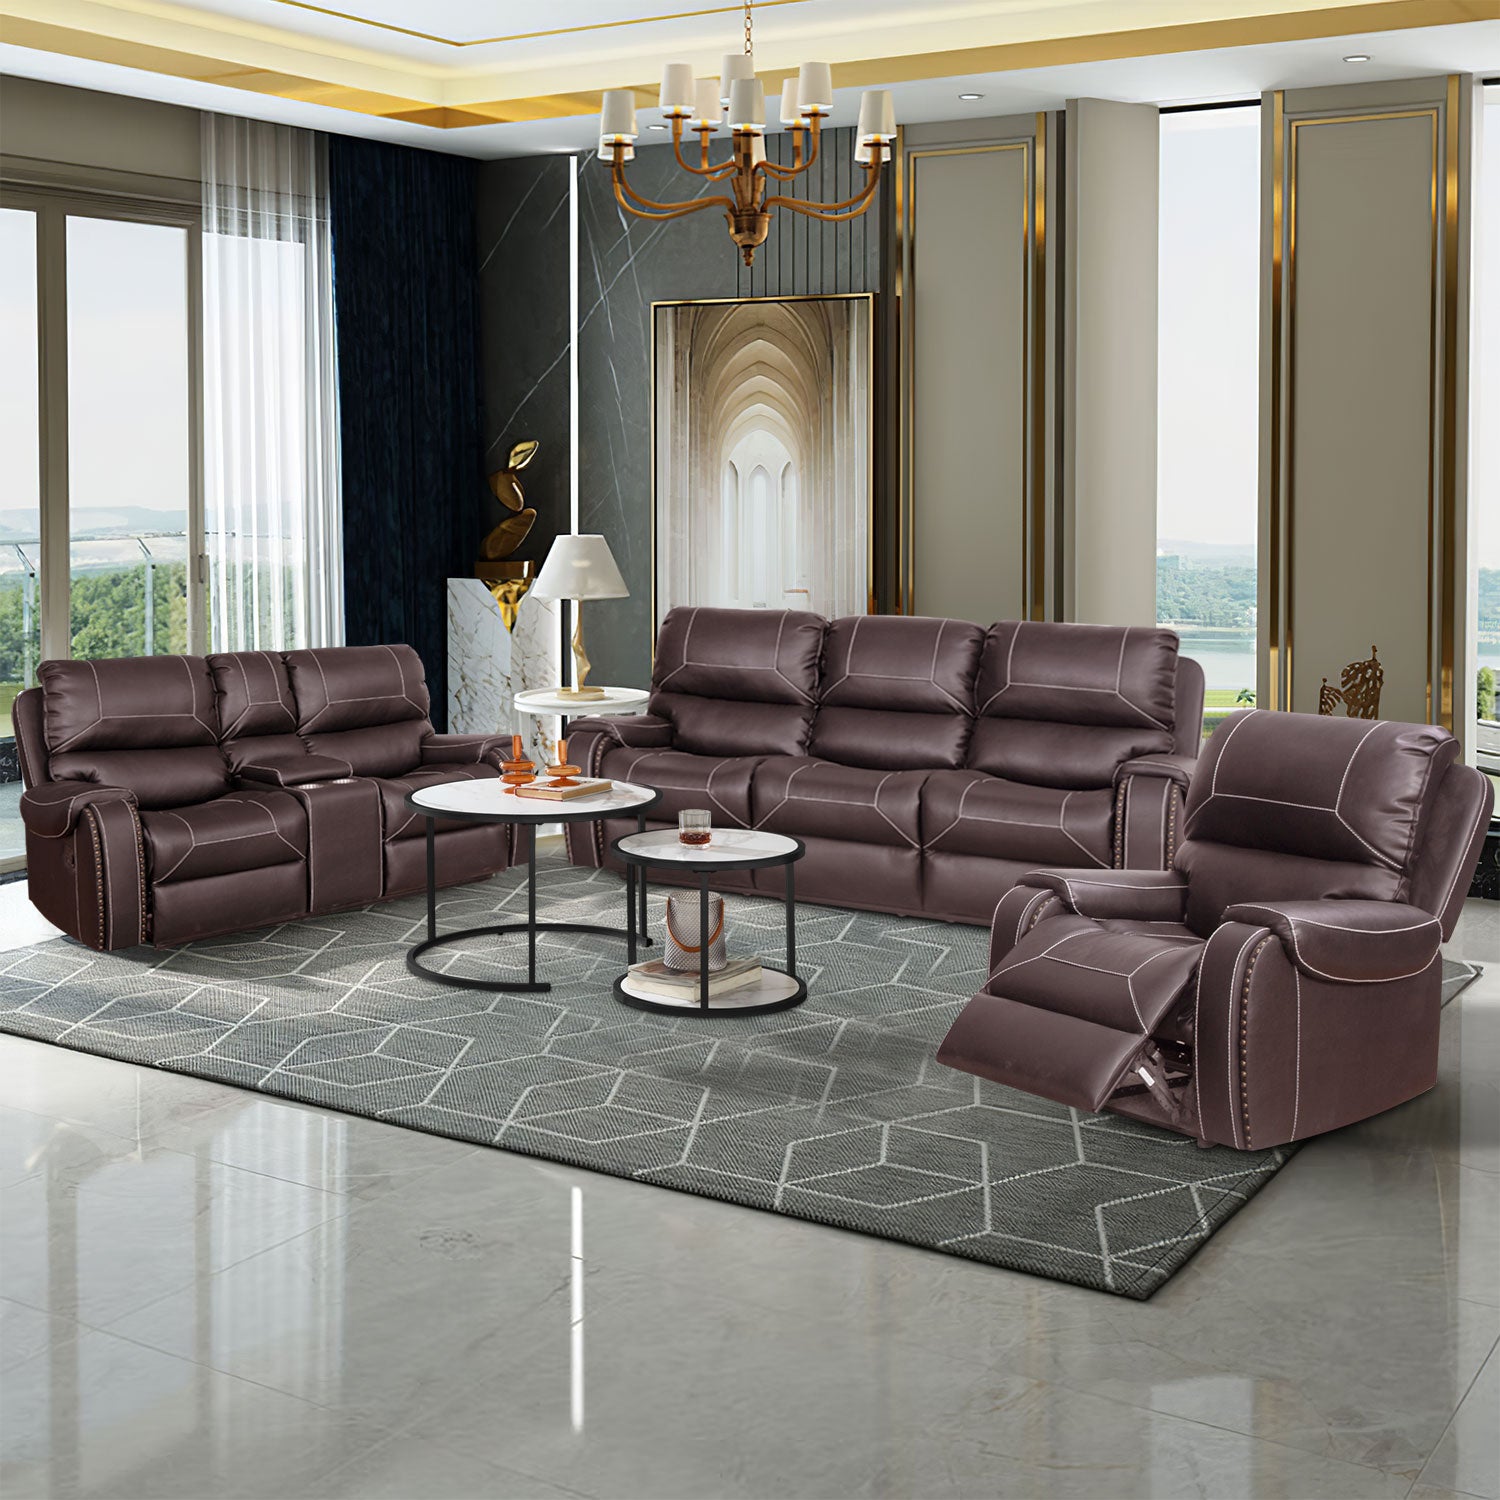 ZNTS Faux Leather Reclining Sofa Couch Single Chair for Living Room Brown W87683975